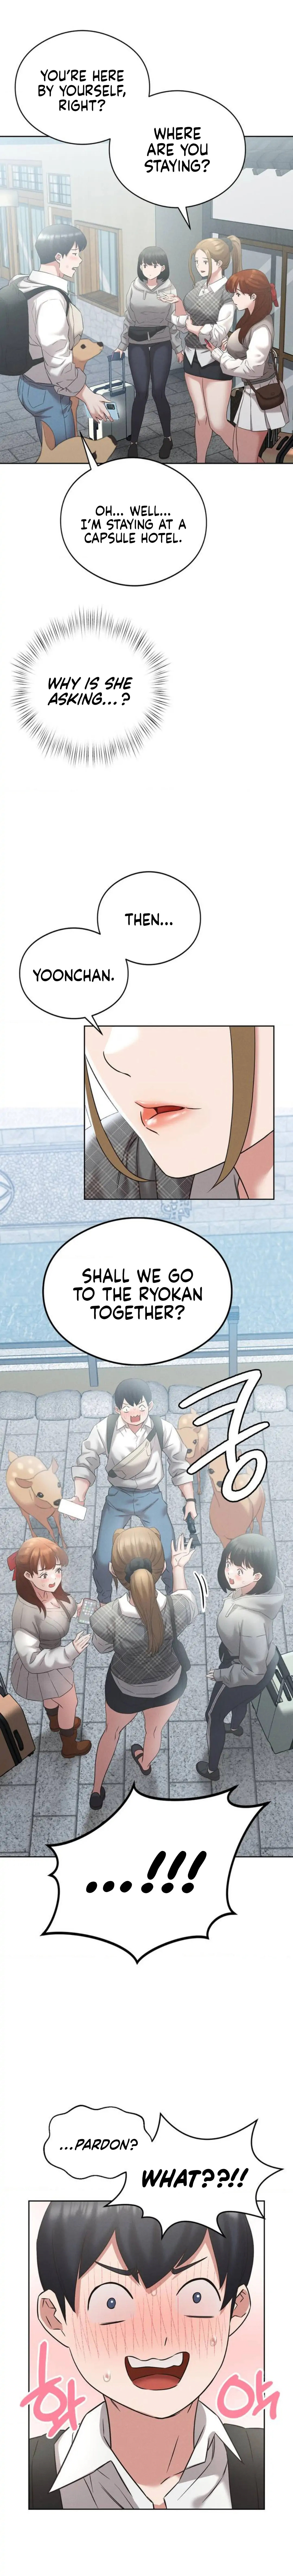 Shall We Go To The Ryokan Together? - Chapter 1 Page 17